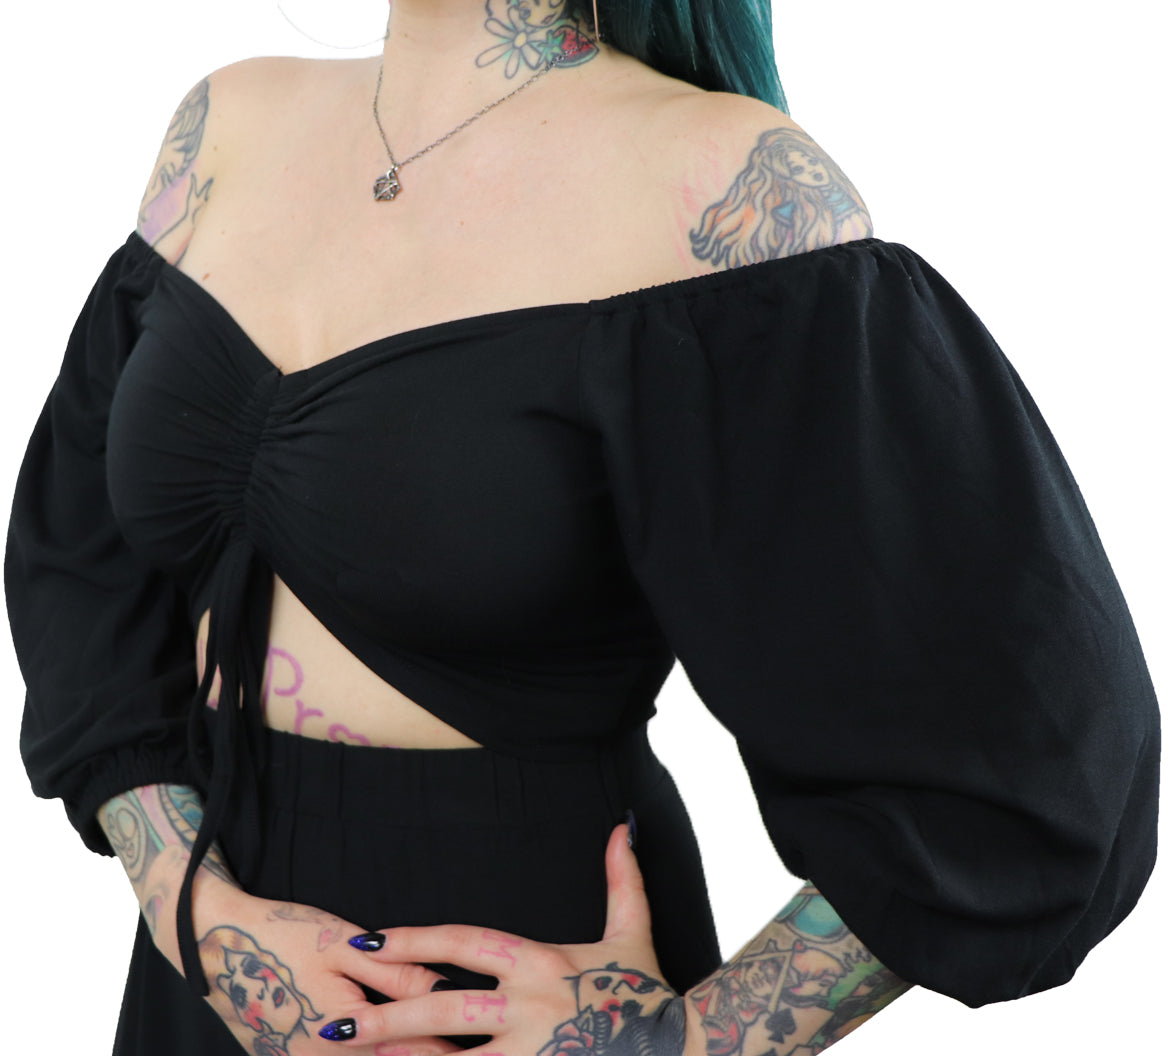 black off the shoulder dress with drawstring ruching above stomach peephole 